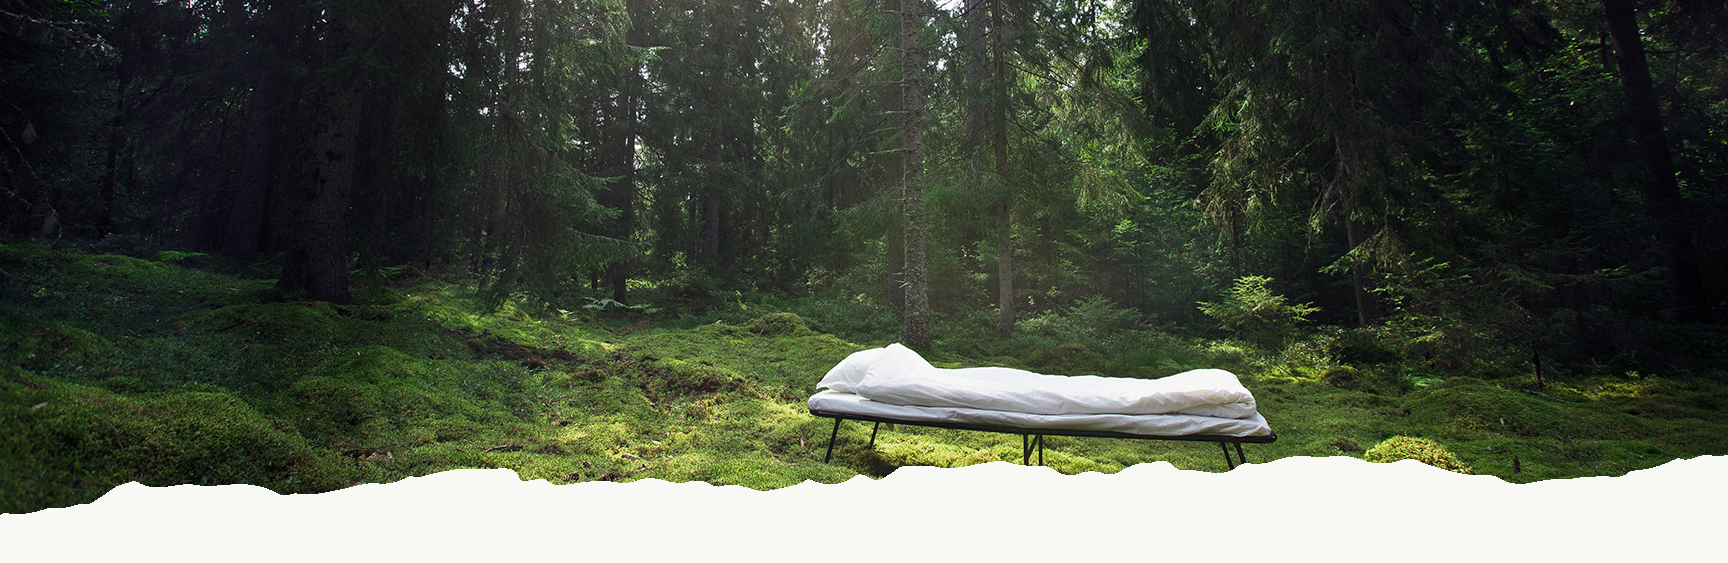 A bed standing in the forest